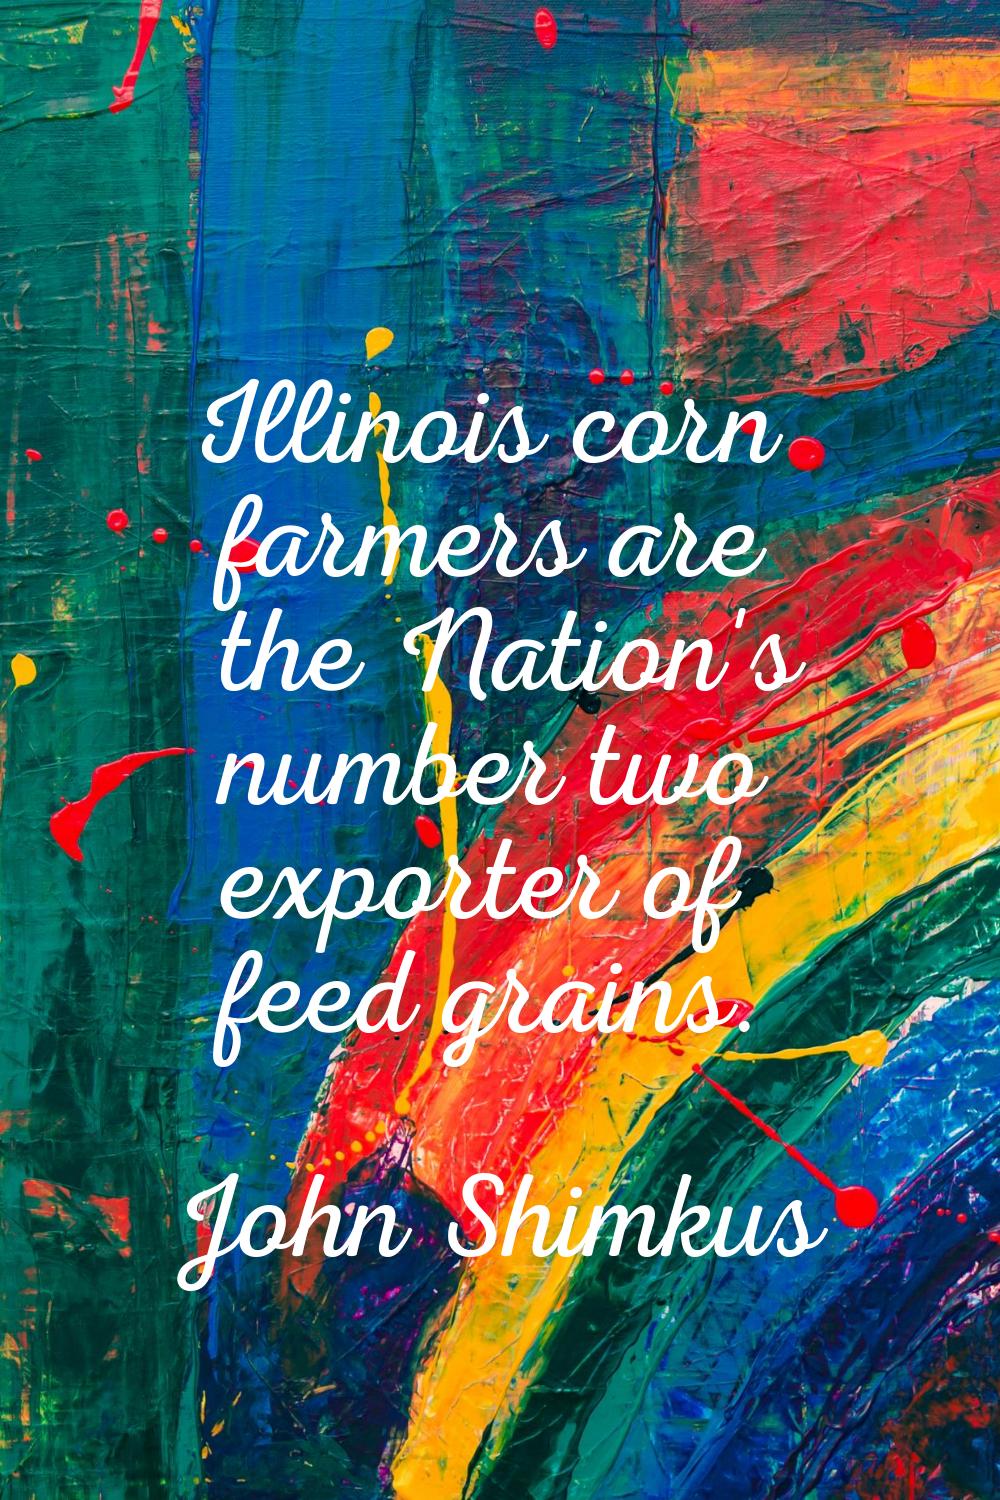 Illinois corn farmers are the Nation's number two exporter of feed grains.